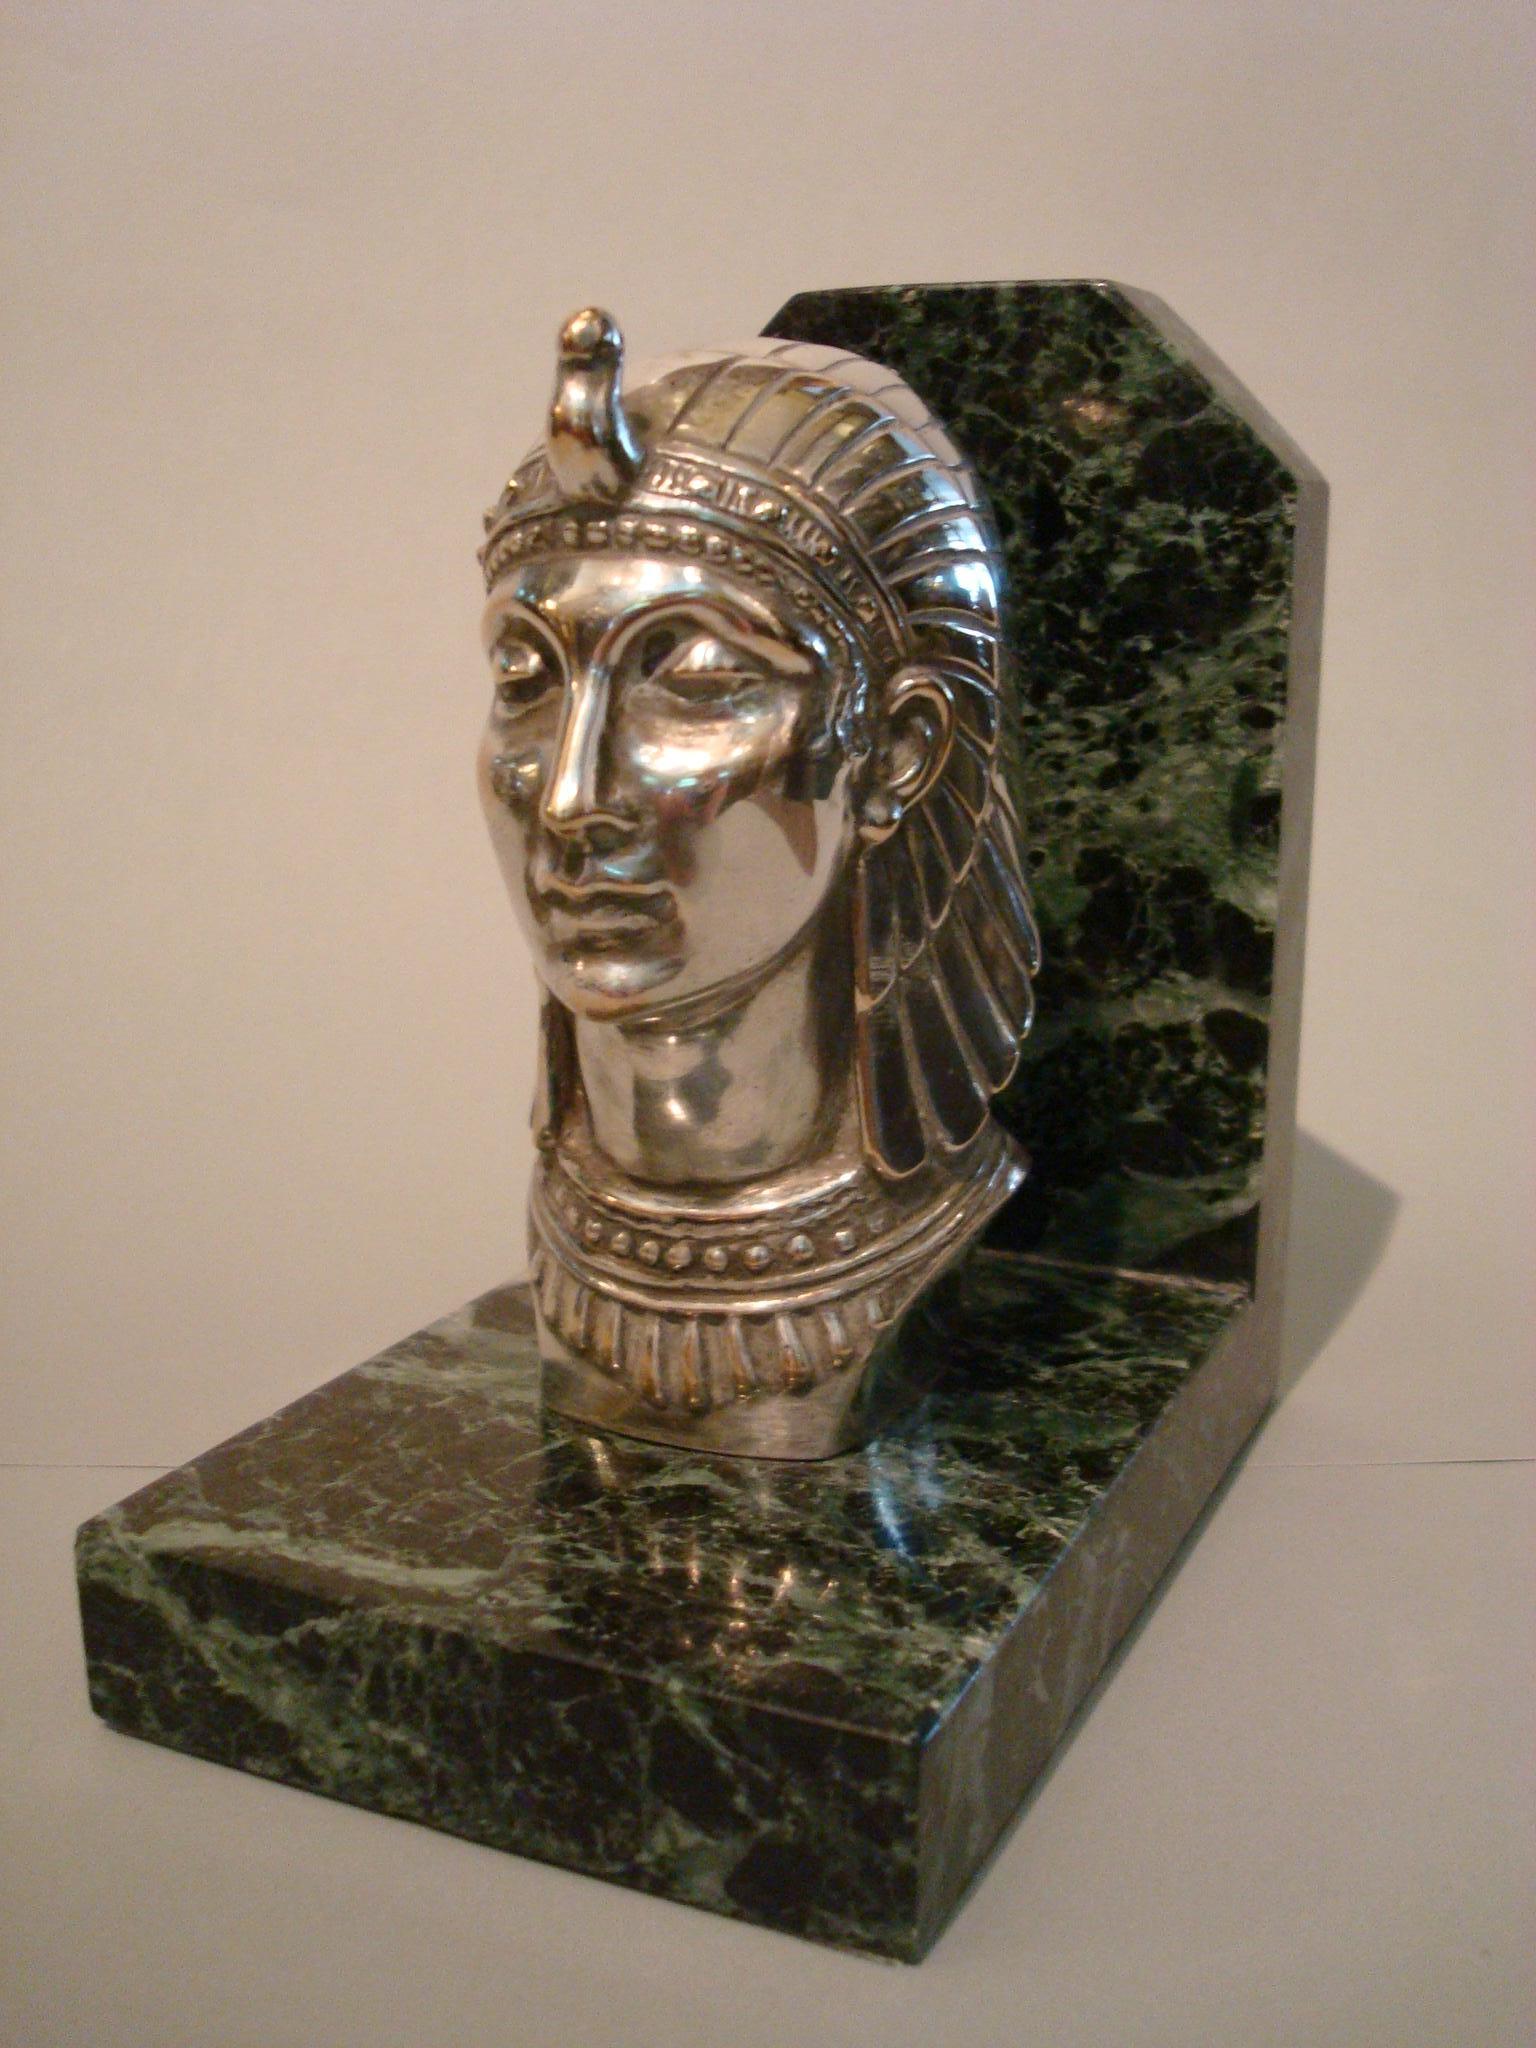 Art Deco Egyptian head silvered bronze signed Frecourt bookends, France, 1920s
Mounted over green marble. Very good conditions.